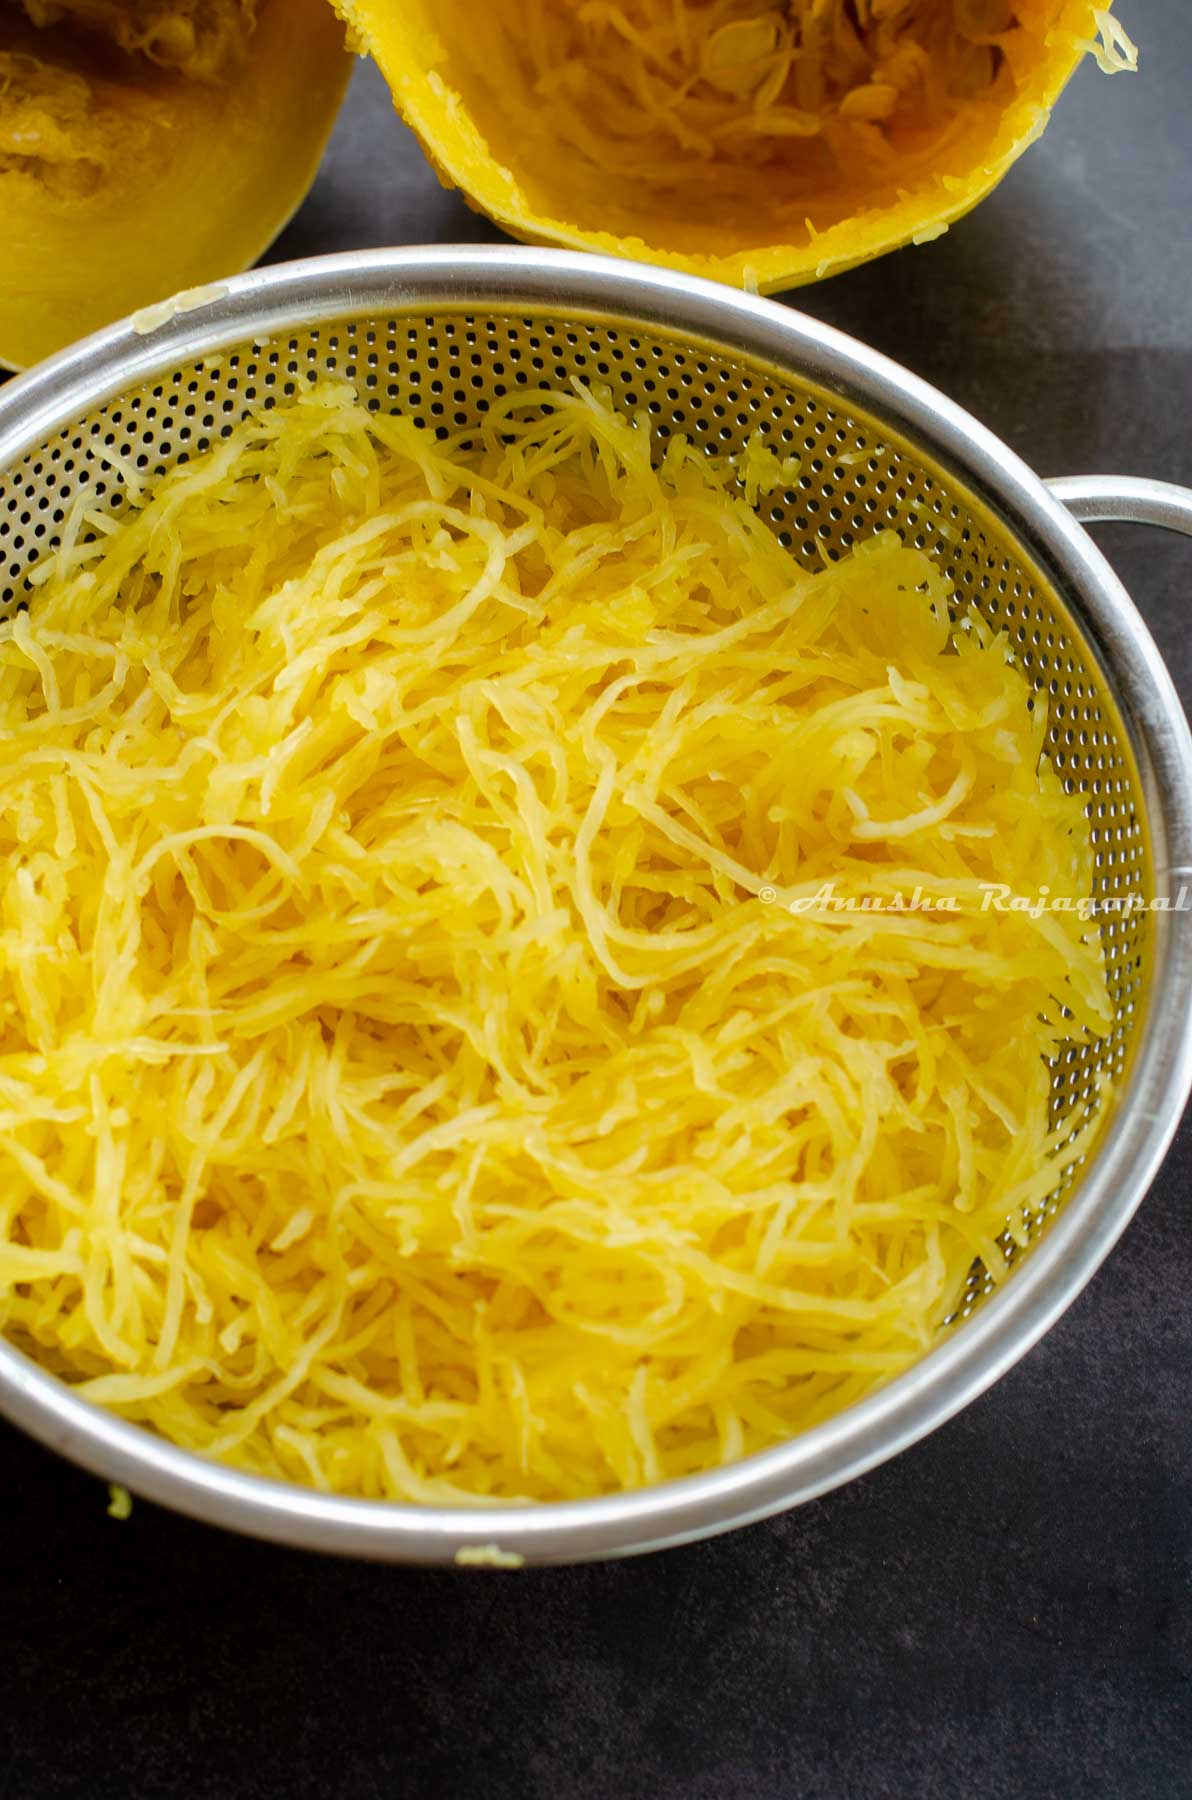 spaghetti squash cooked and cooled in a metal colander